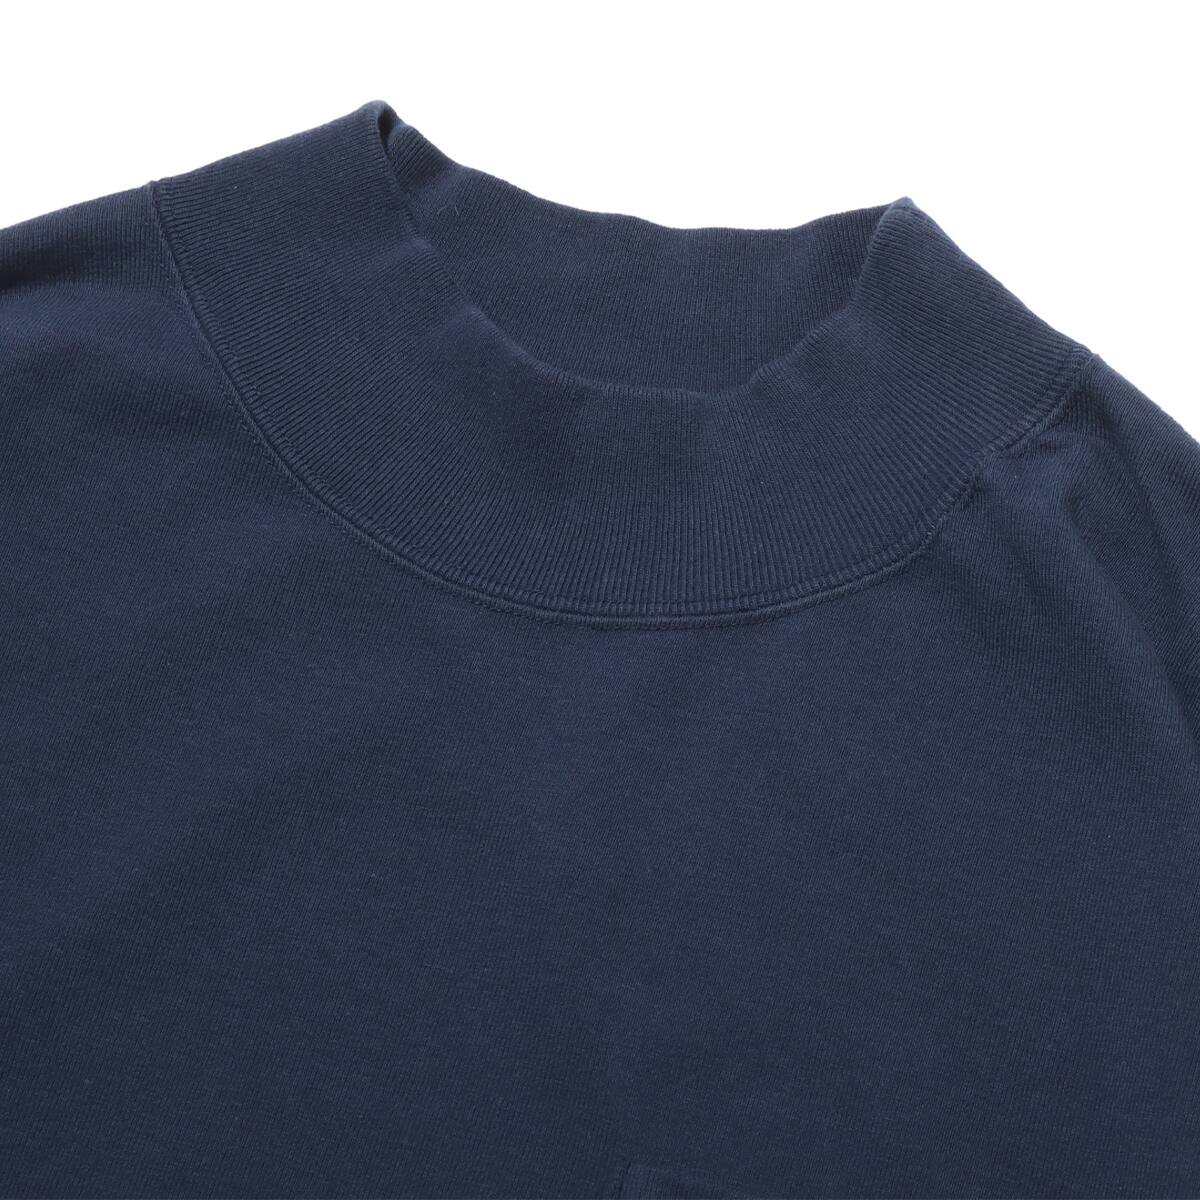 THE NORTH FACE PURPLE LABEL Field Mockneck Long Sleeve Tee Navy 23FW-I